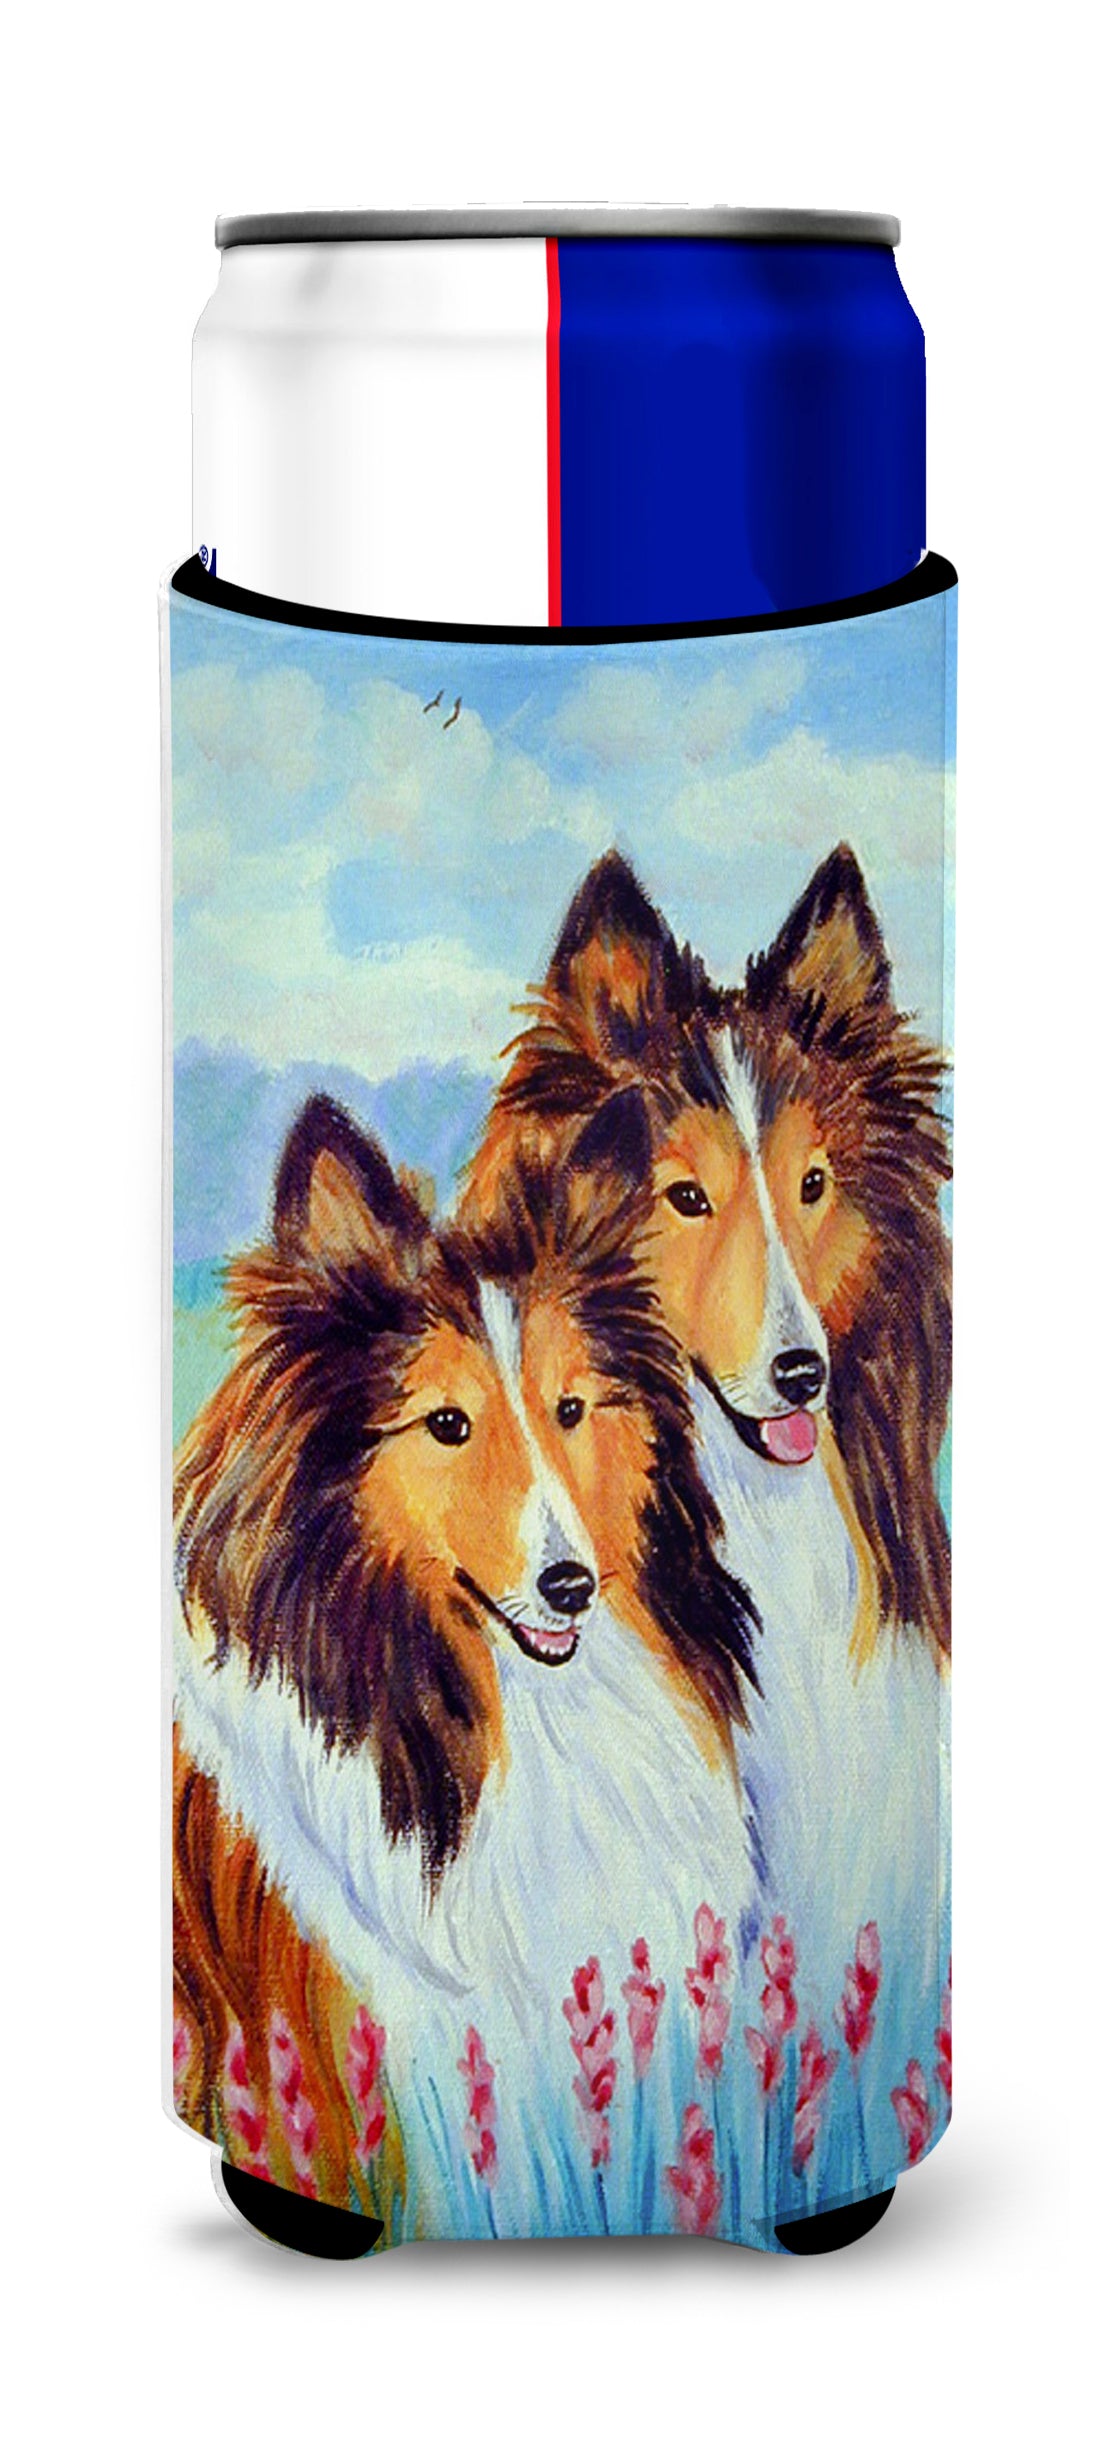 Sable Shelties Double Trouble Ultra Beverage Insulators for slim cans 7086MUK.